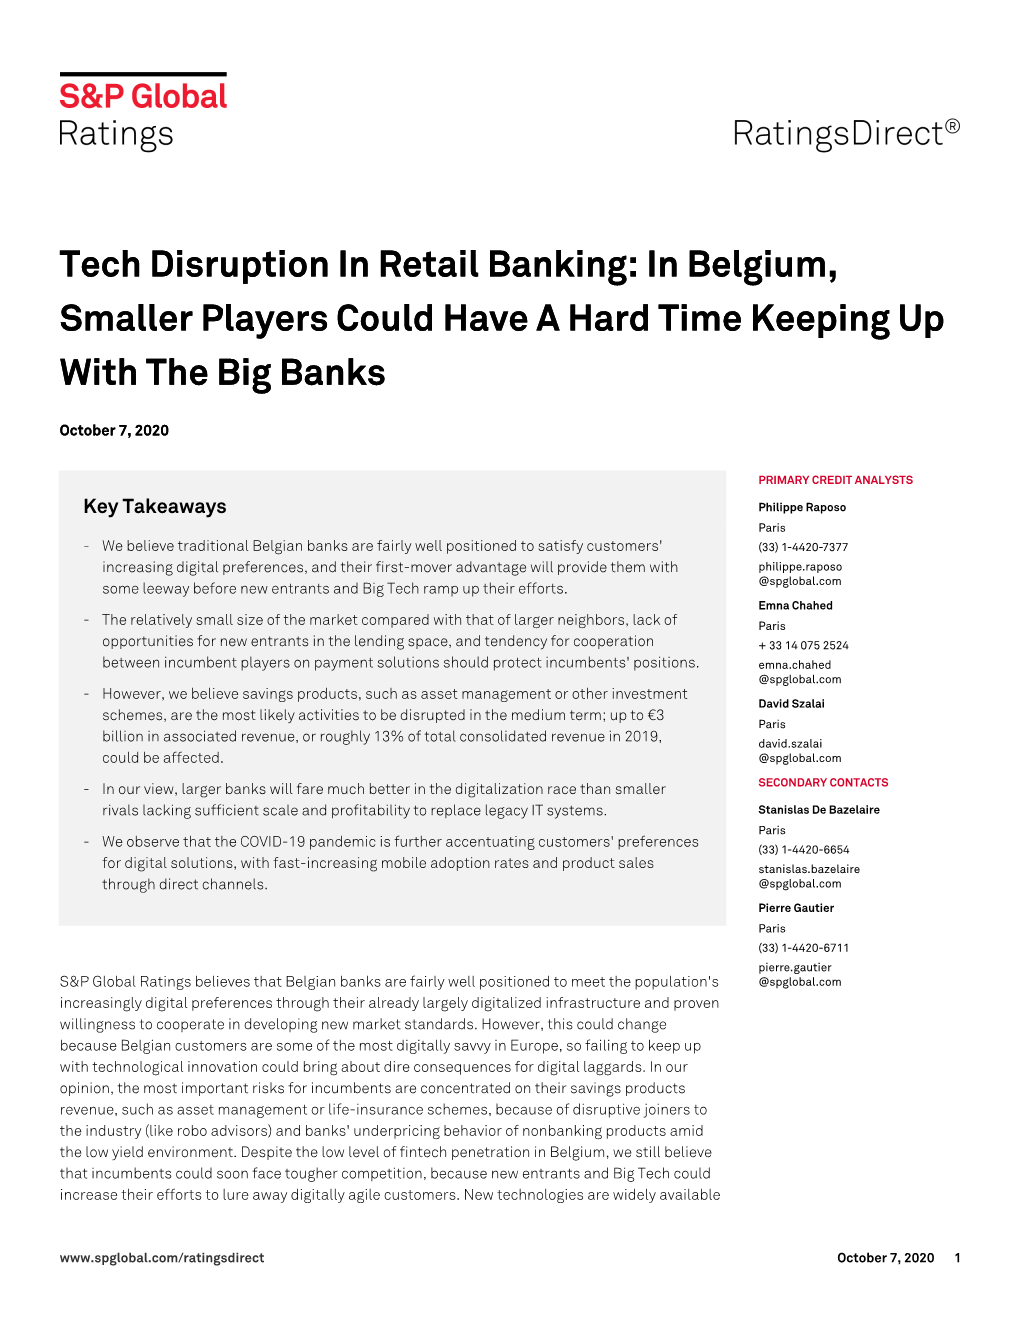 Tech Disruption in Retail Banking: in Belgium, Smaller Players Could Have a Hard Time Keeping up with the Big Banks